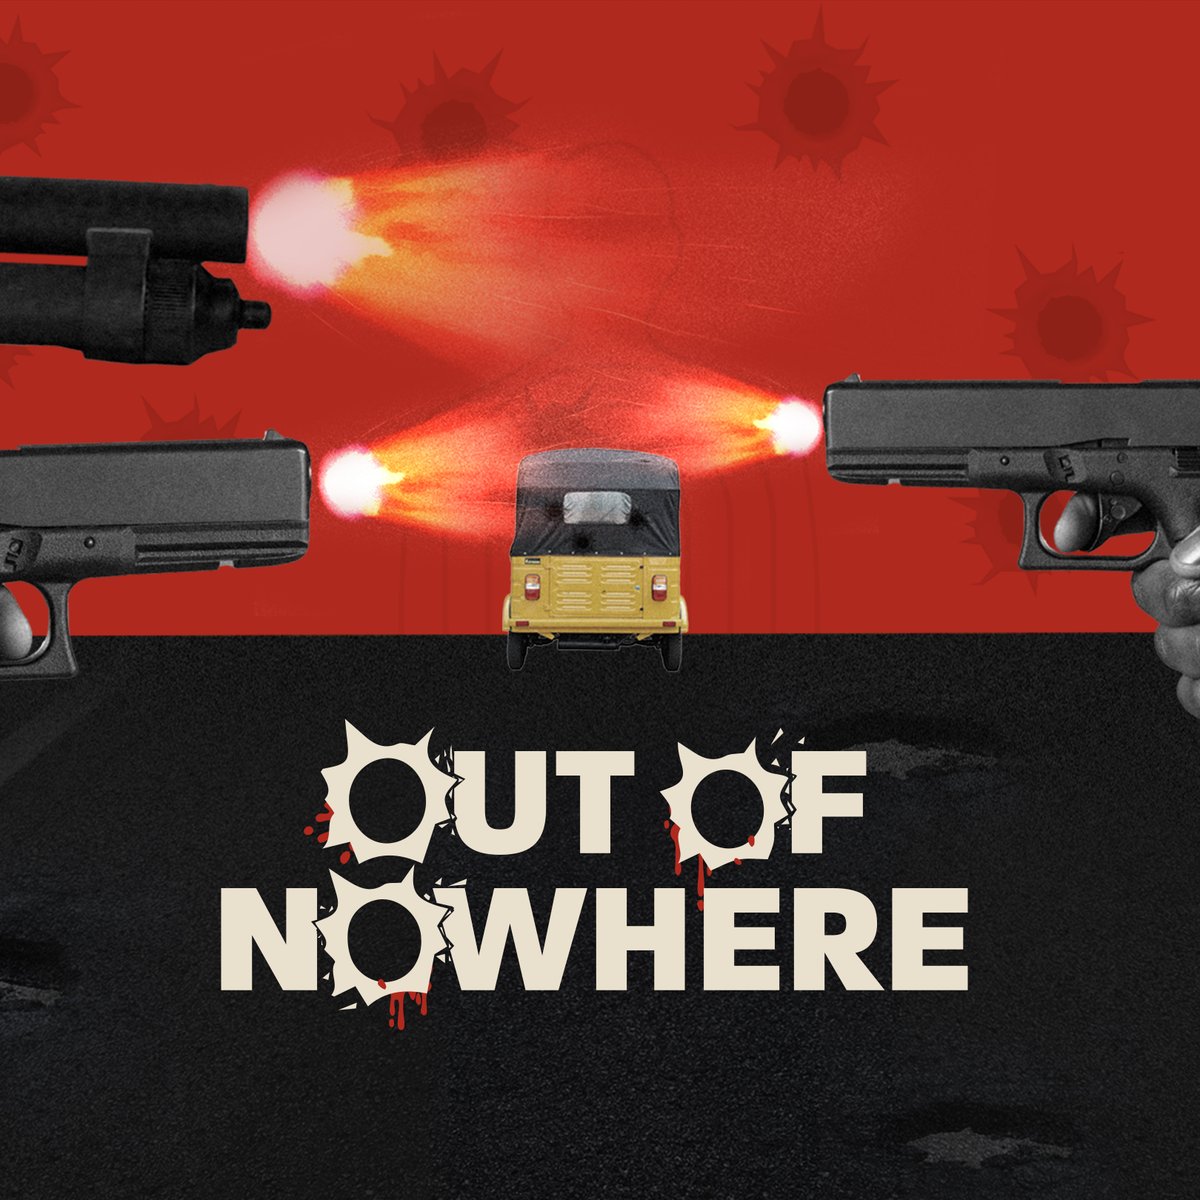 🔊🔊 Our new documentary, “Out of Nowhere” premieres Thursday, Nov 30th. It’s a story about a man’s quest for justice after a tragic police shooting in Lagos, Nigeria, in 2015. Subscribe to our YouTube channel to be notified when it drops ⬇️ youtube.com/@tigereyefound…